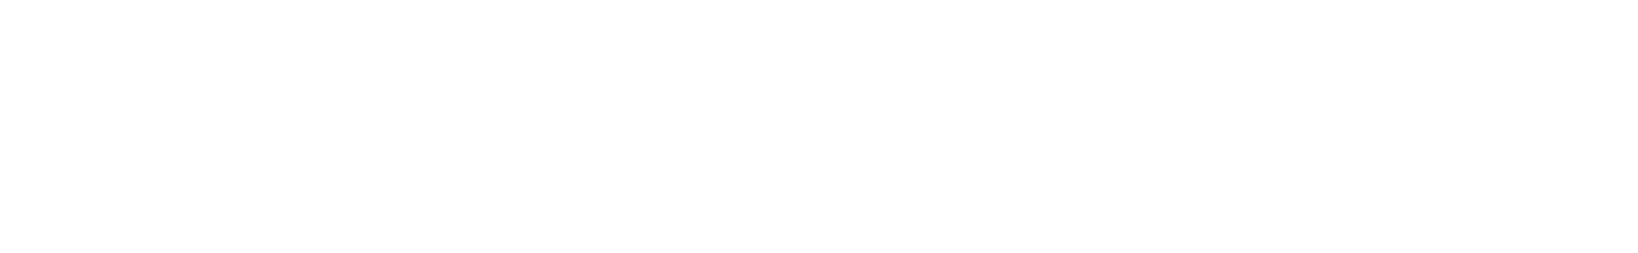 General Litigation Business Litigation Probate Wills Trust Asset Protection Lawyers Dallas, Plano, University Park, Houston, Fort Worth, Katy TX | Family Law Paternity Child Custody Child Support Divorce Reproductive Rights LGBQT Attorneys Dallas County Texas Collin Denton Tarrant Harris  TX | Corporate Law Business Corporate Law Firms Texas